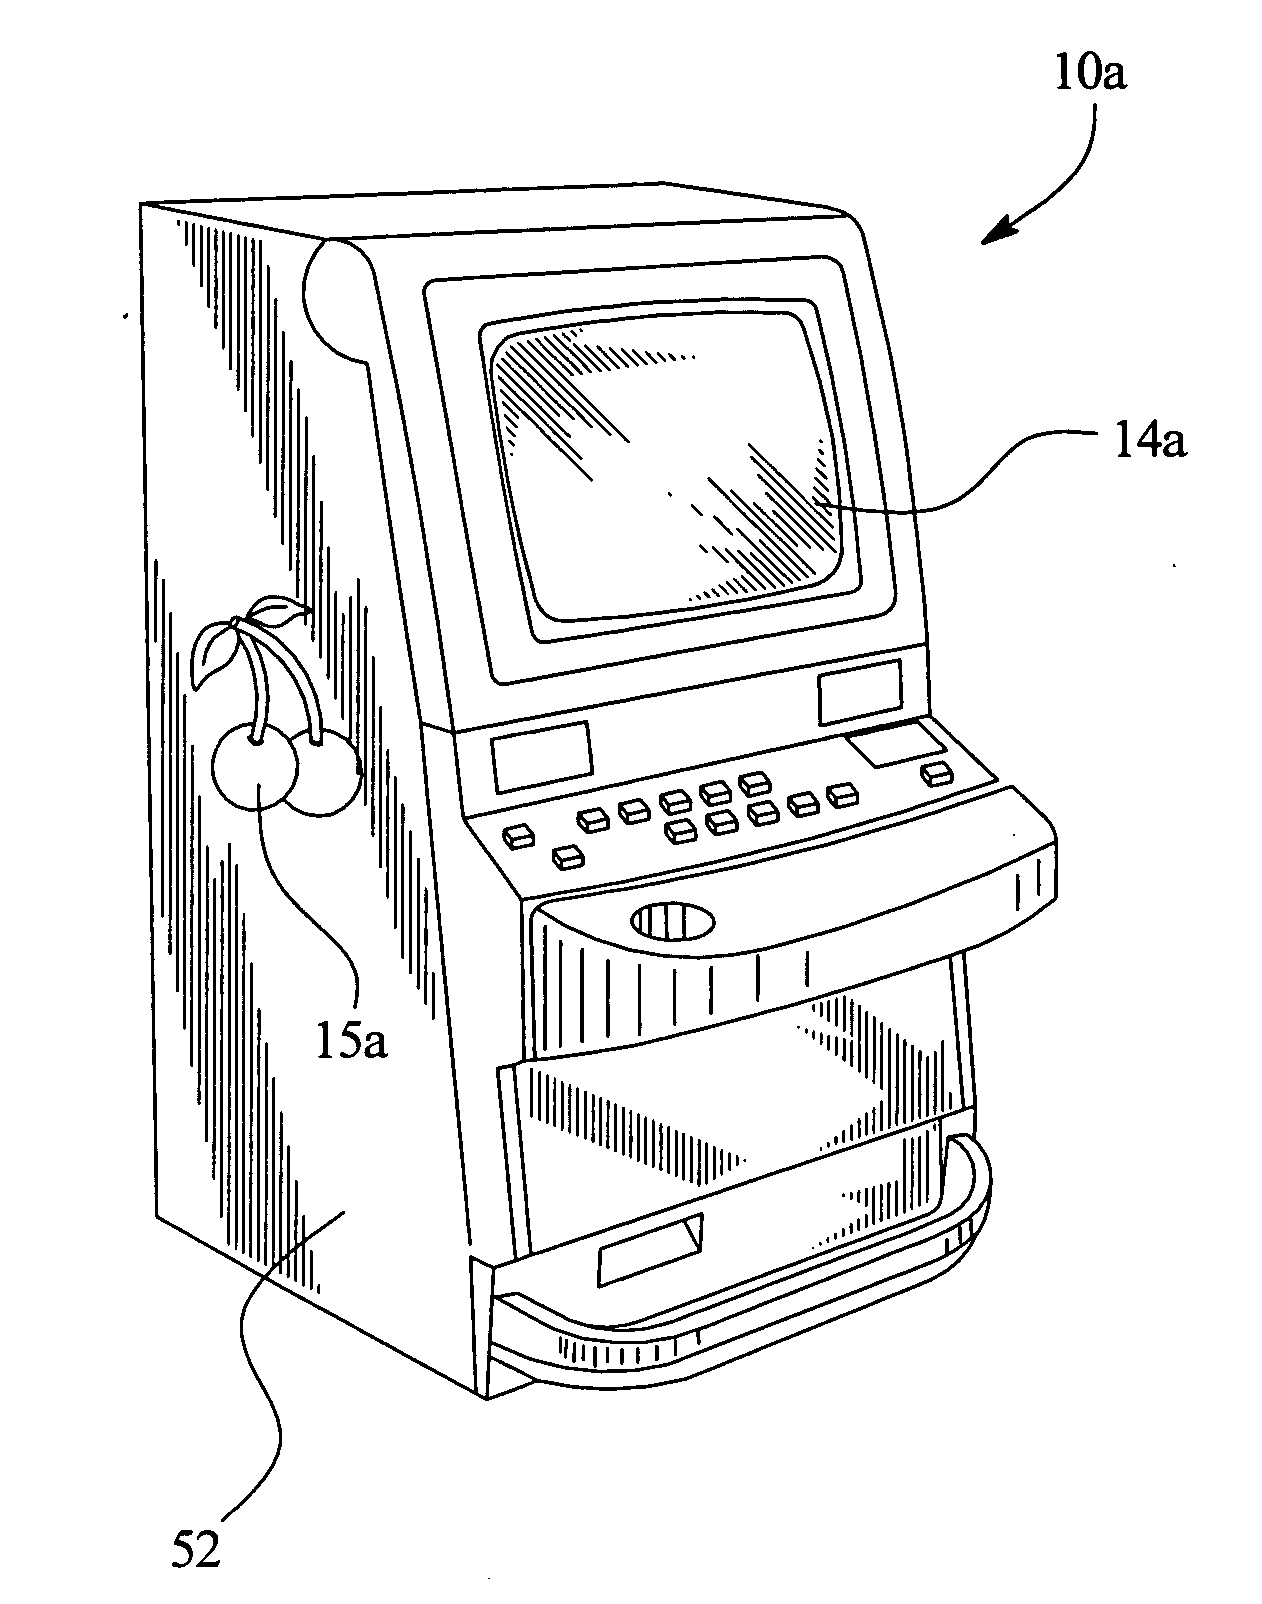 Method of assembling a gaming device including modular cabinets and replaceable laminate panels